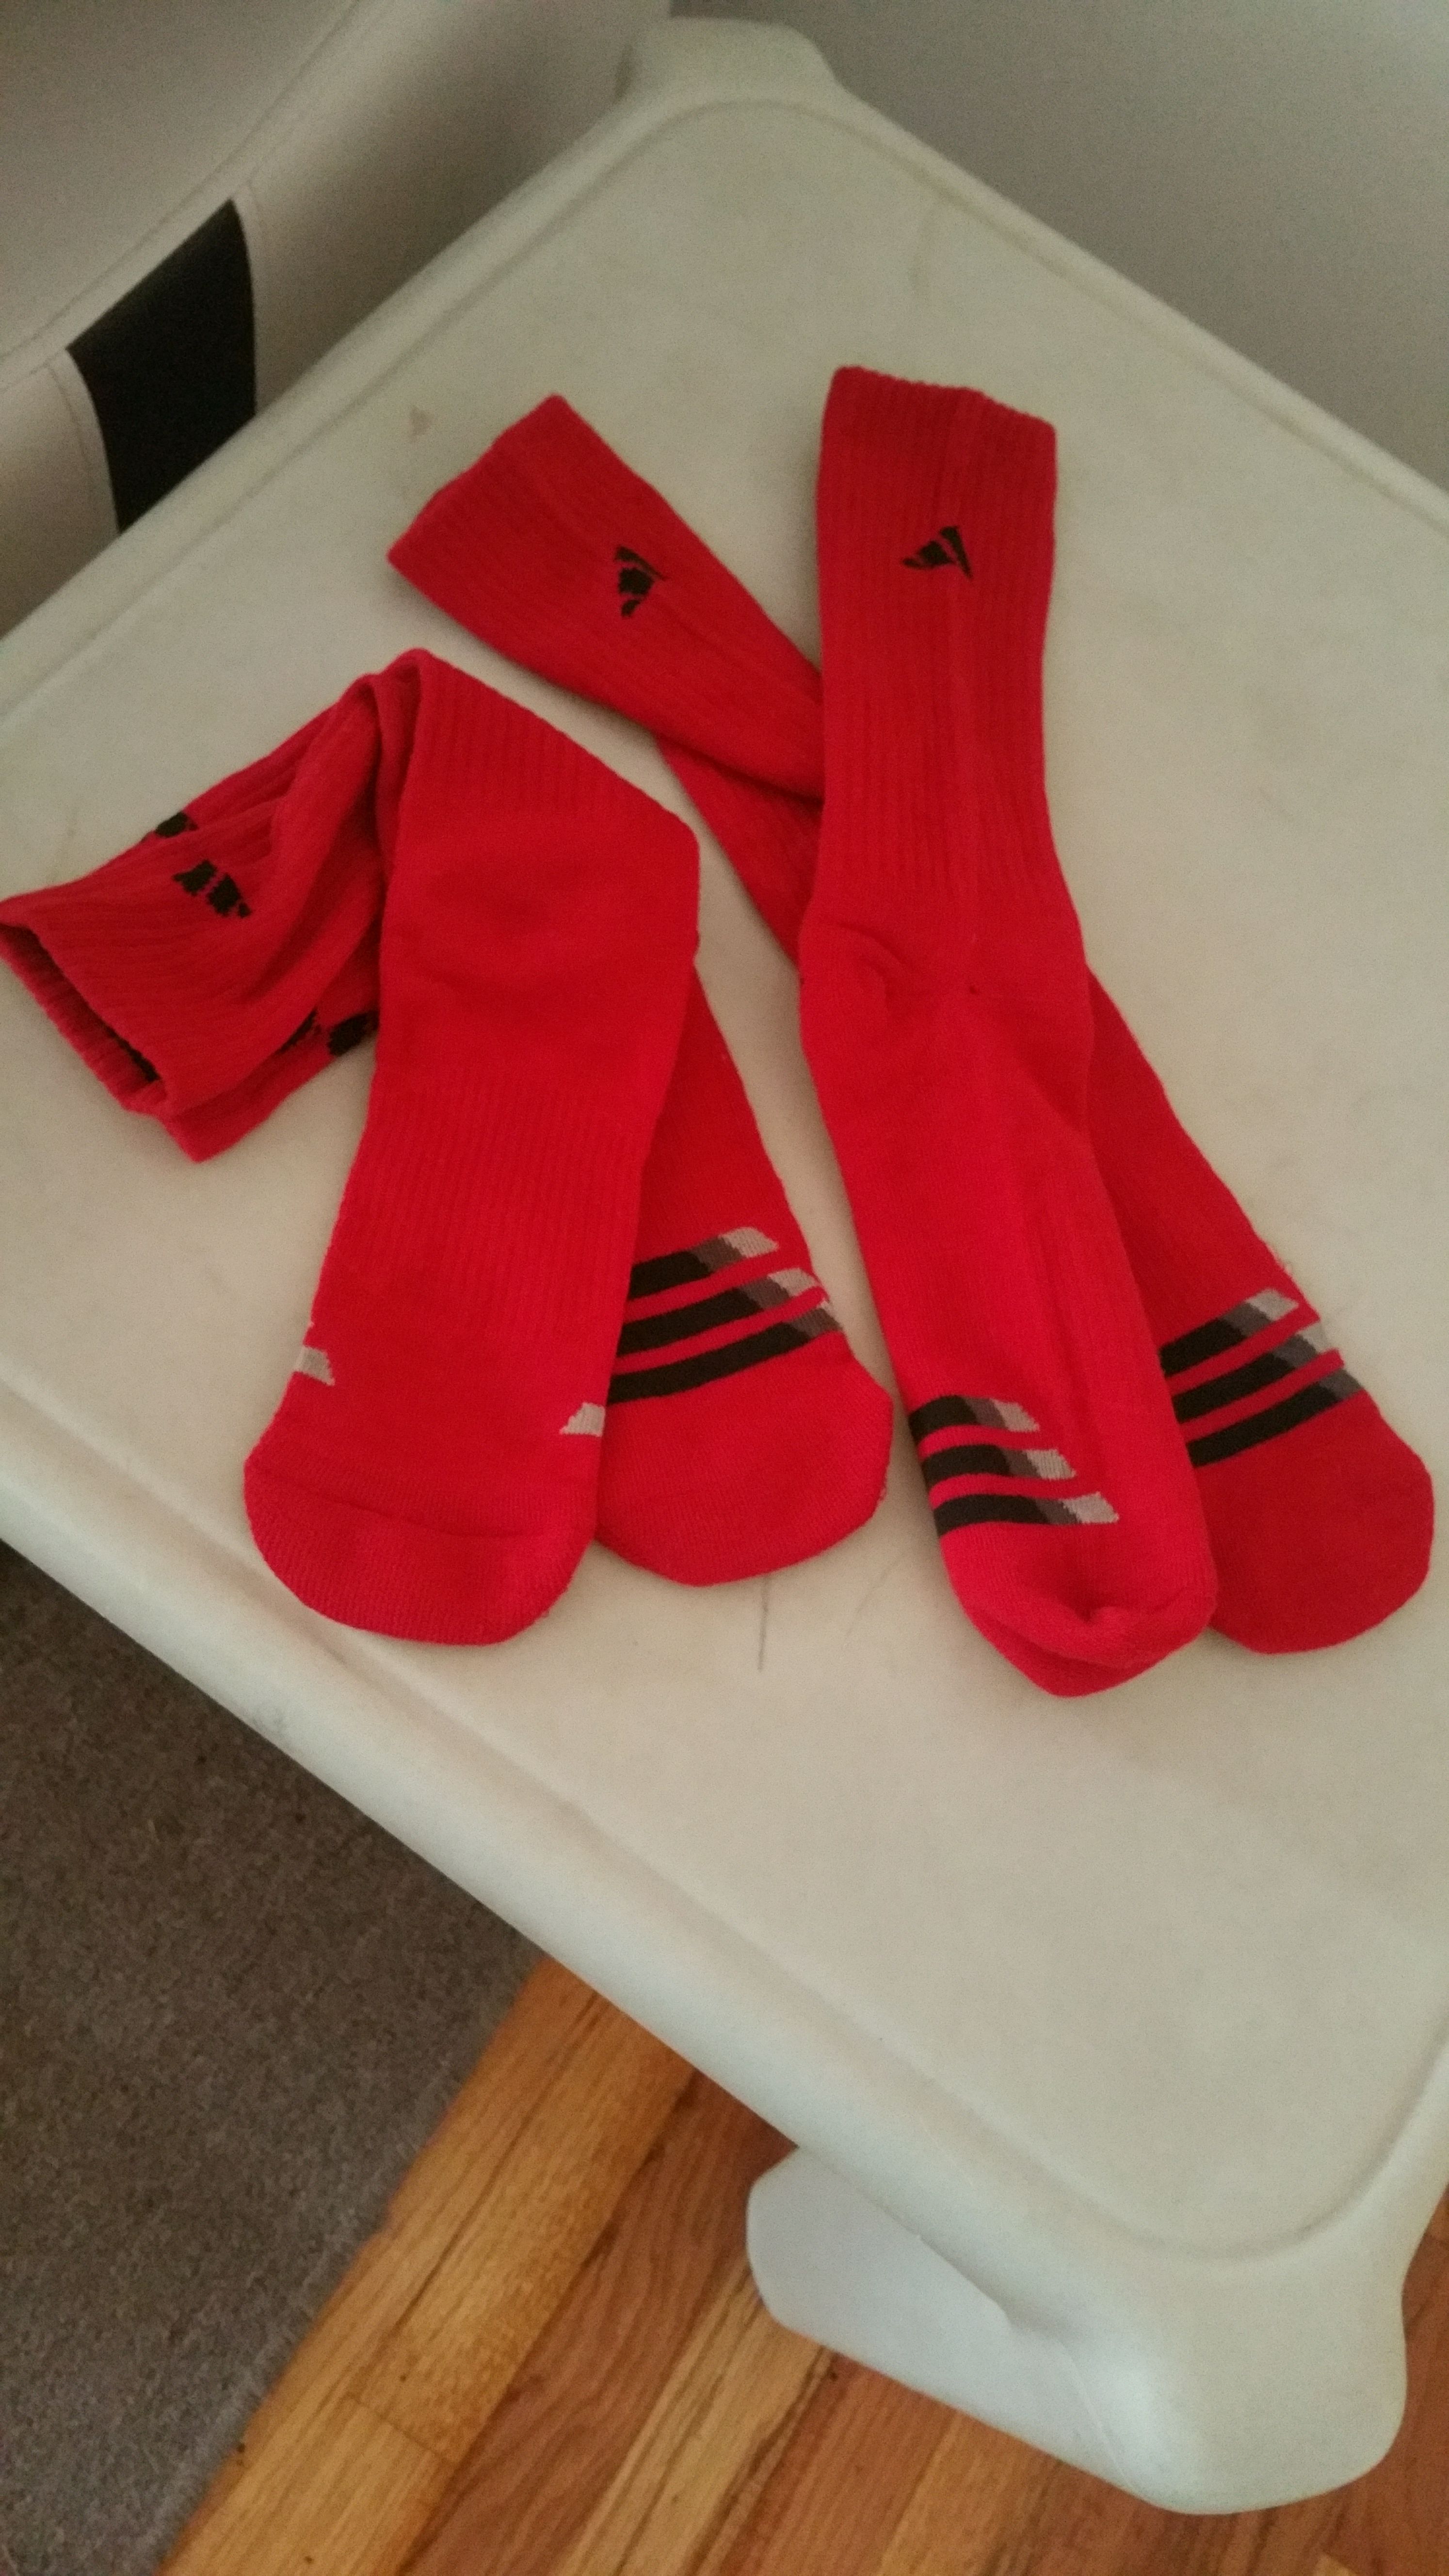 2pairs Adidas socks size :6-12 shoe size new with tag